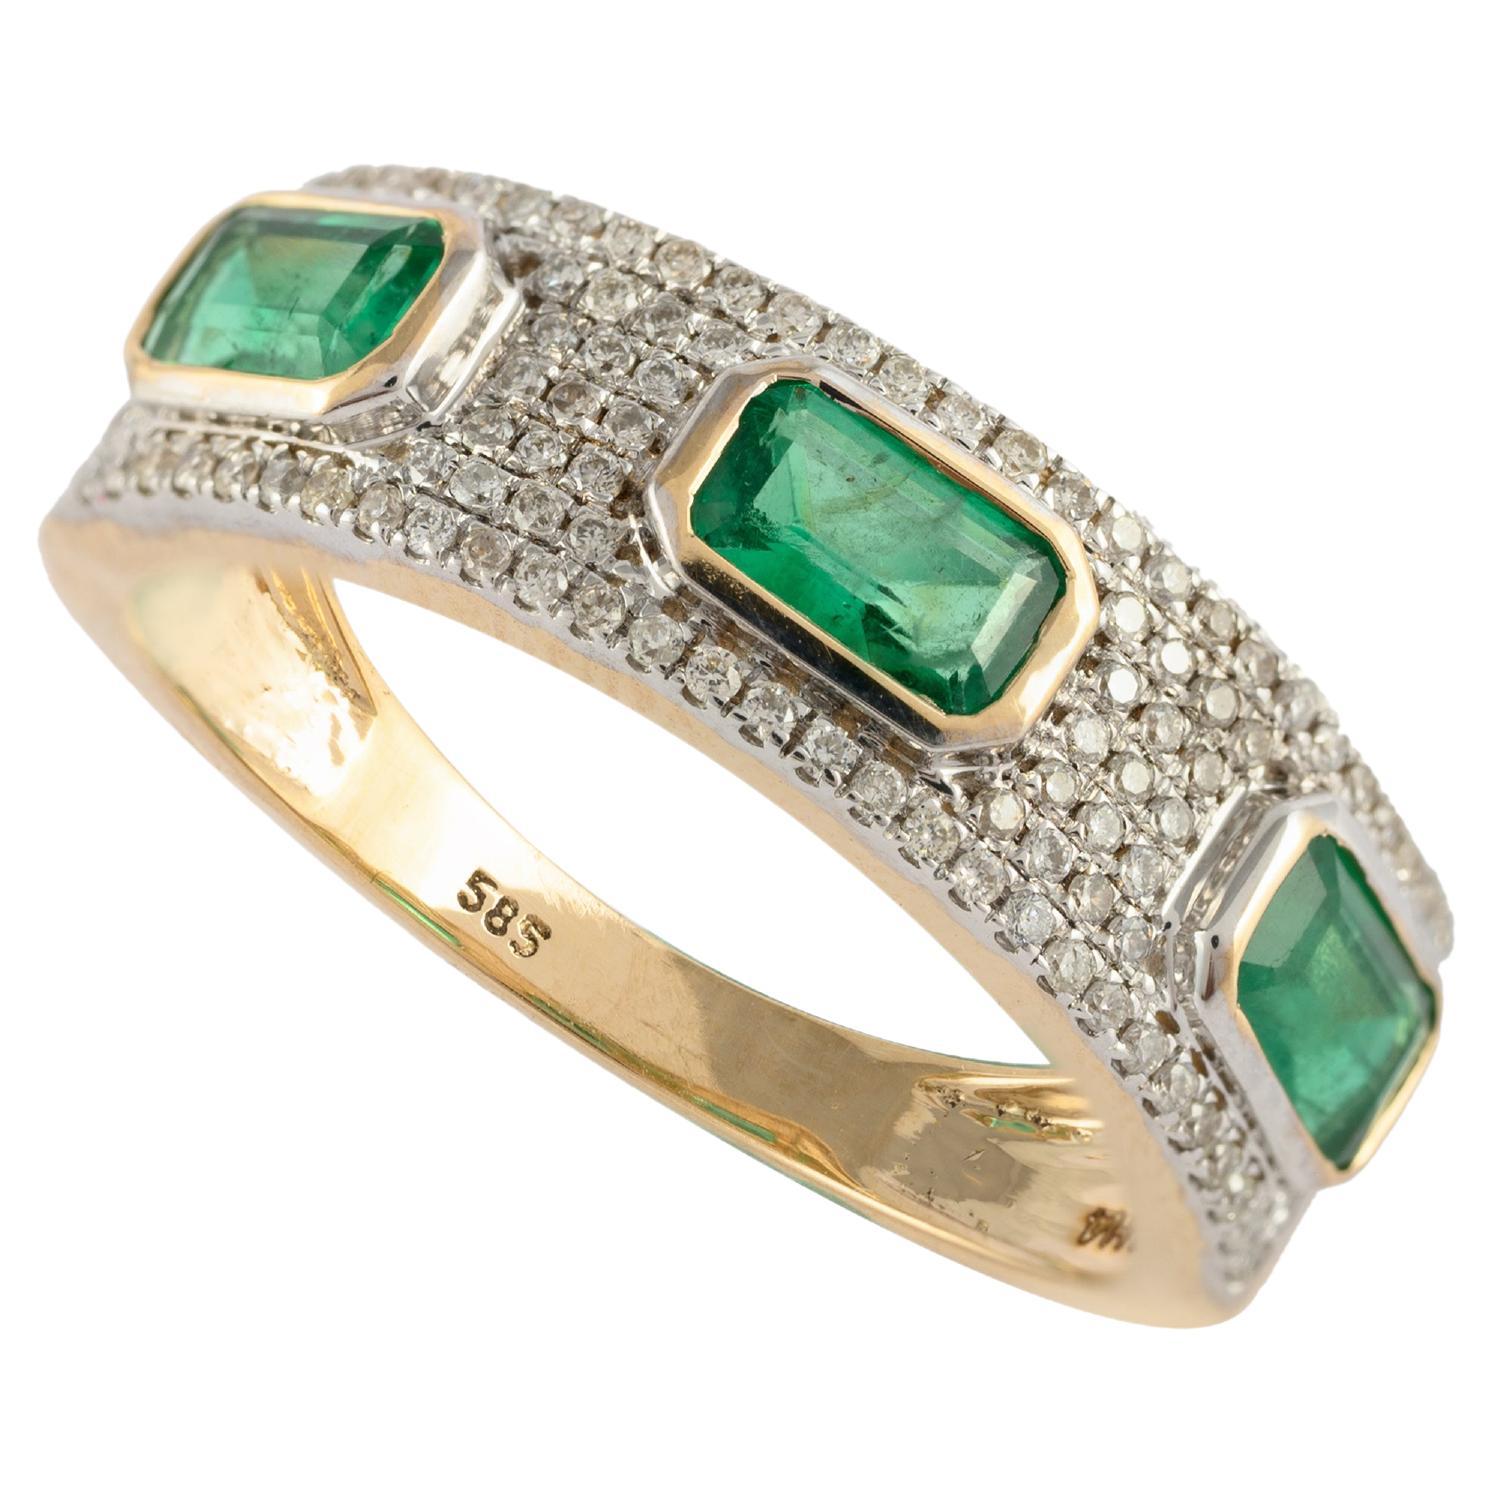 For Sale:  Impeccable 14k Yellow Gold Three Stone Emerald and Diamond Engagement Ring